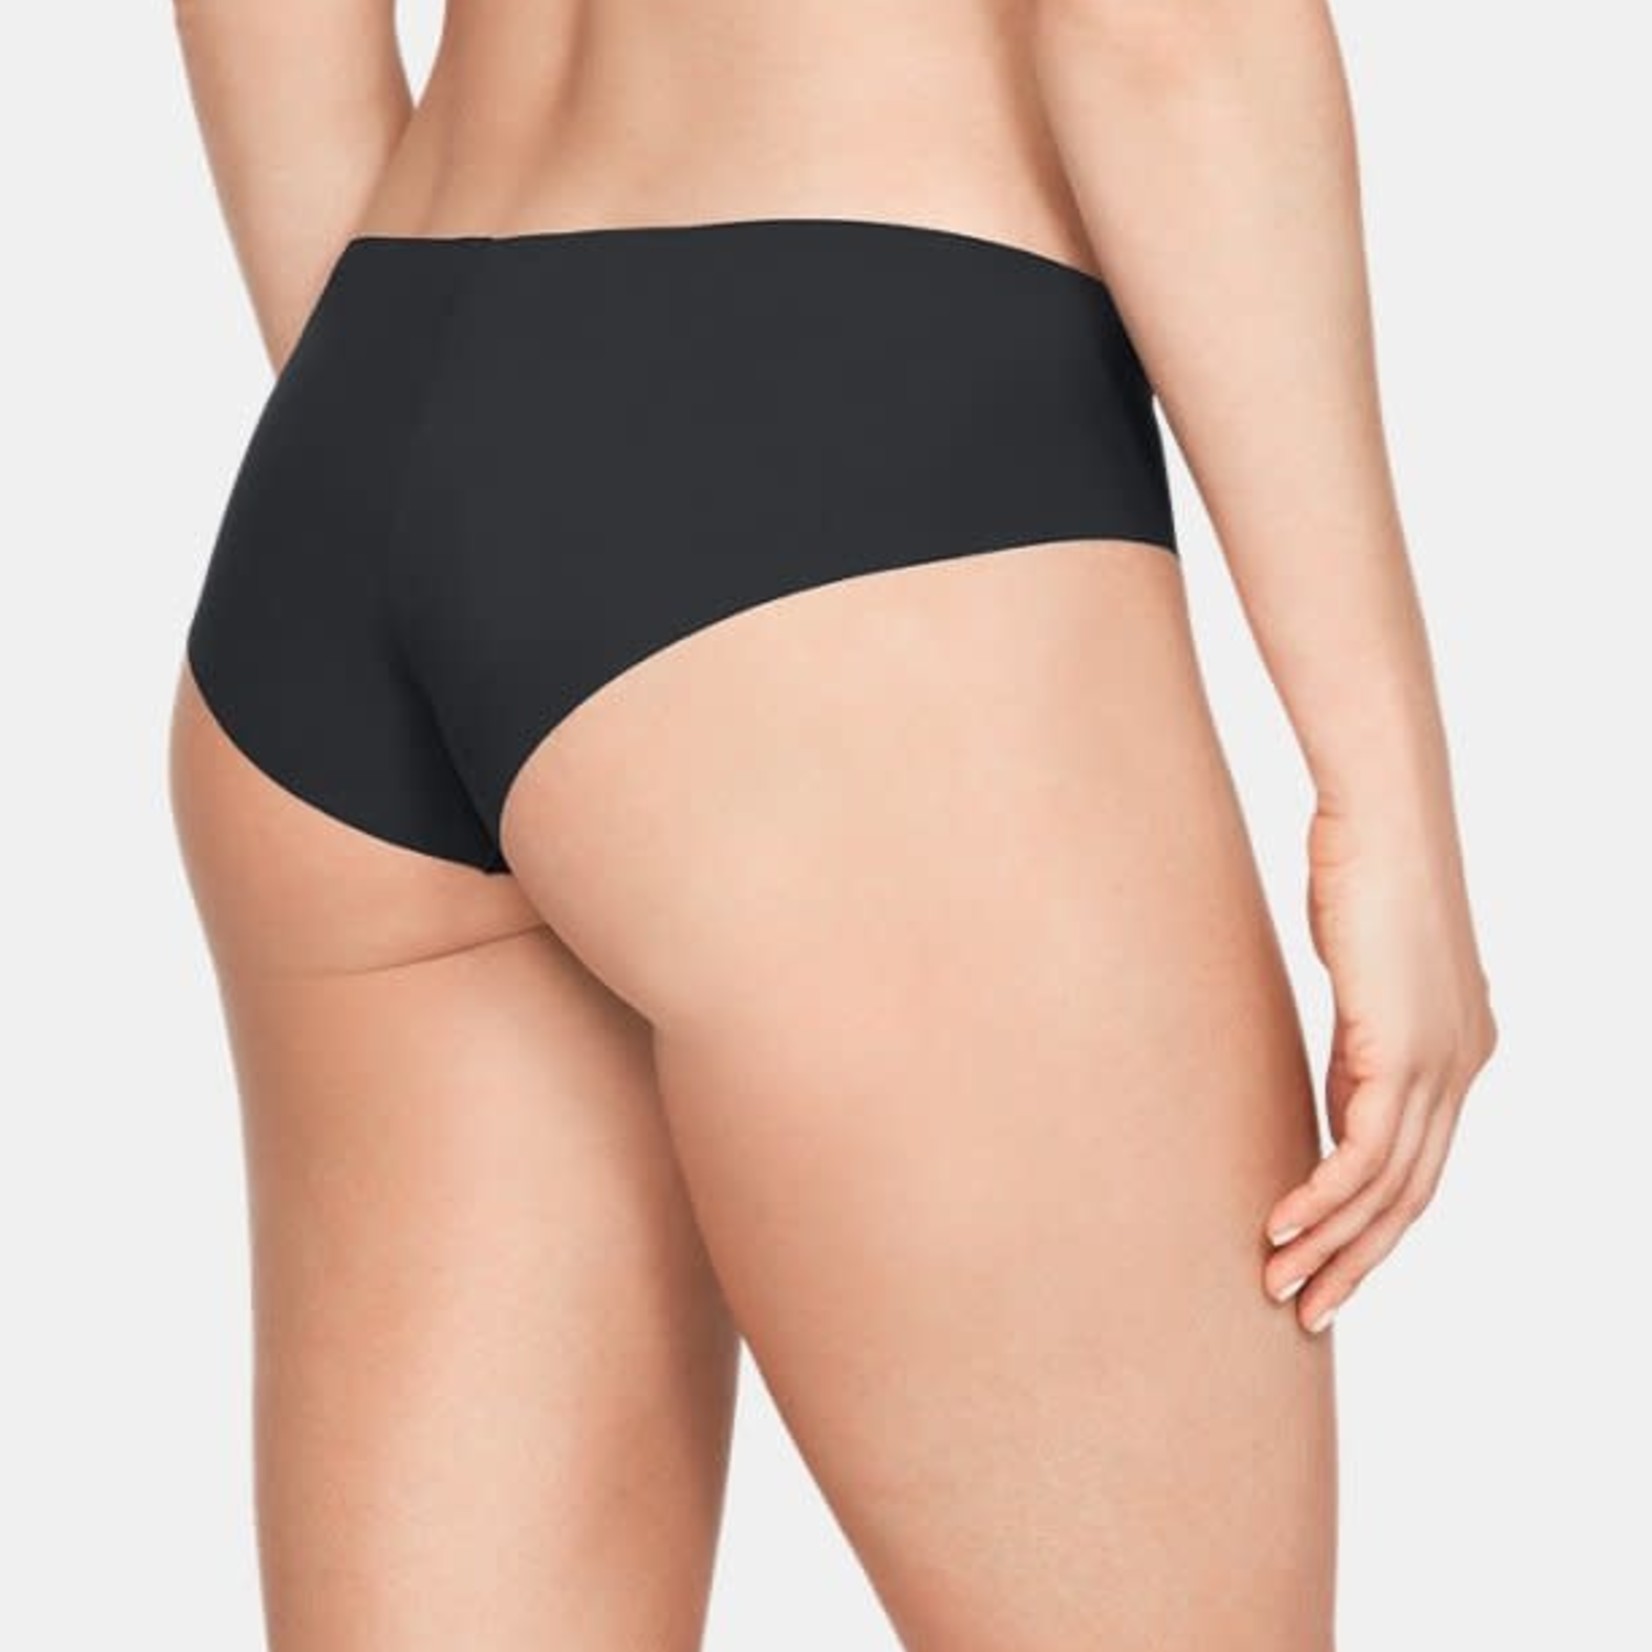 Under Armour Ps Thong Women's Seamless Underwear 3 Pack, Black